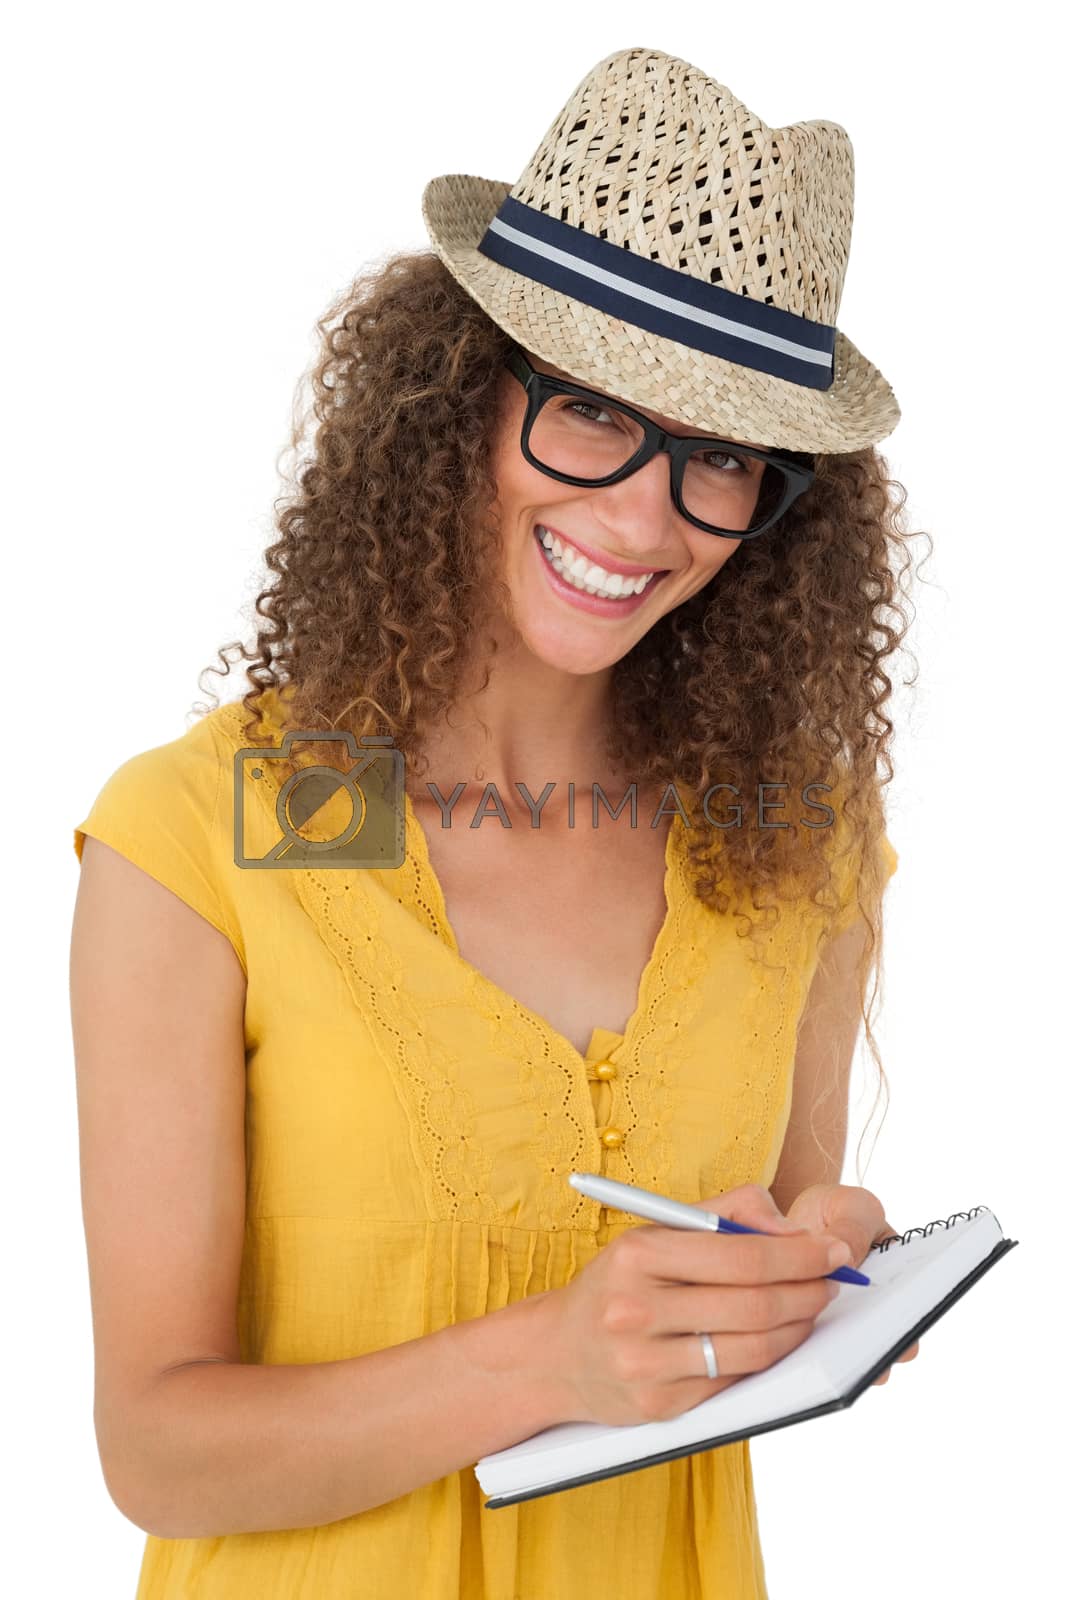 Royalty free image of Cheerful young woman writing in notepad by Wavebreakmedia